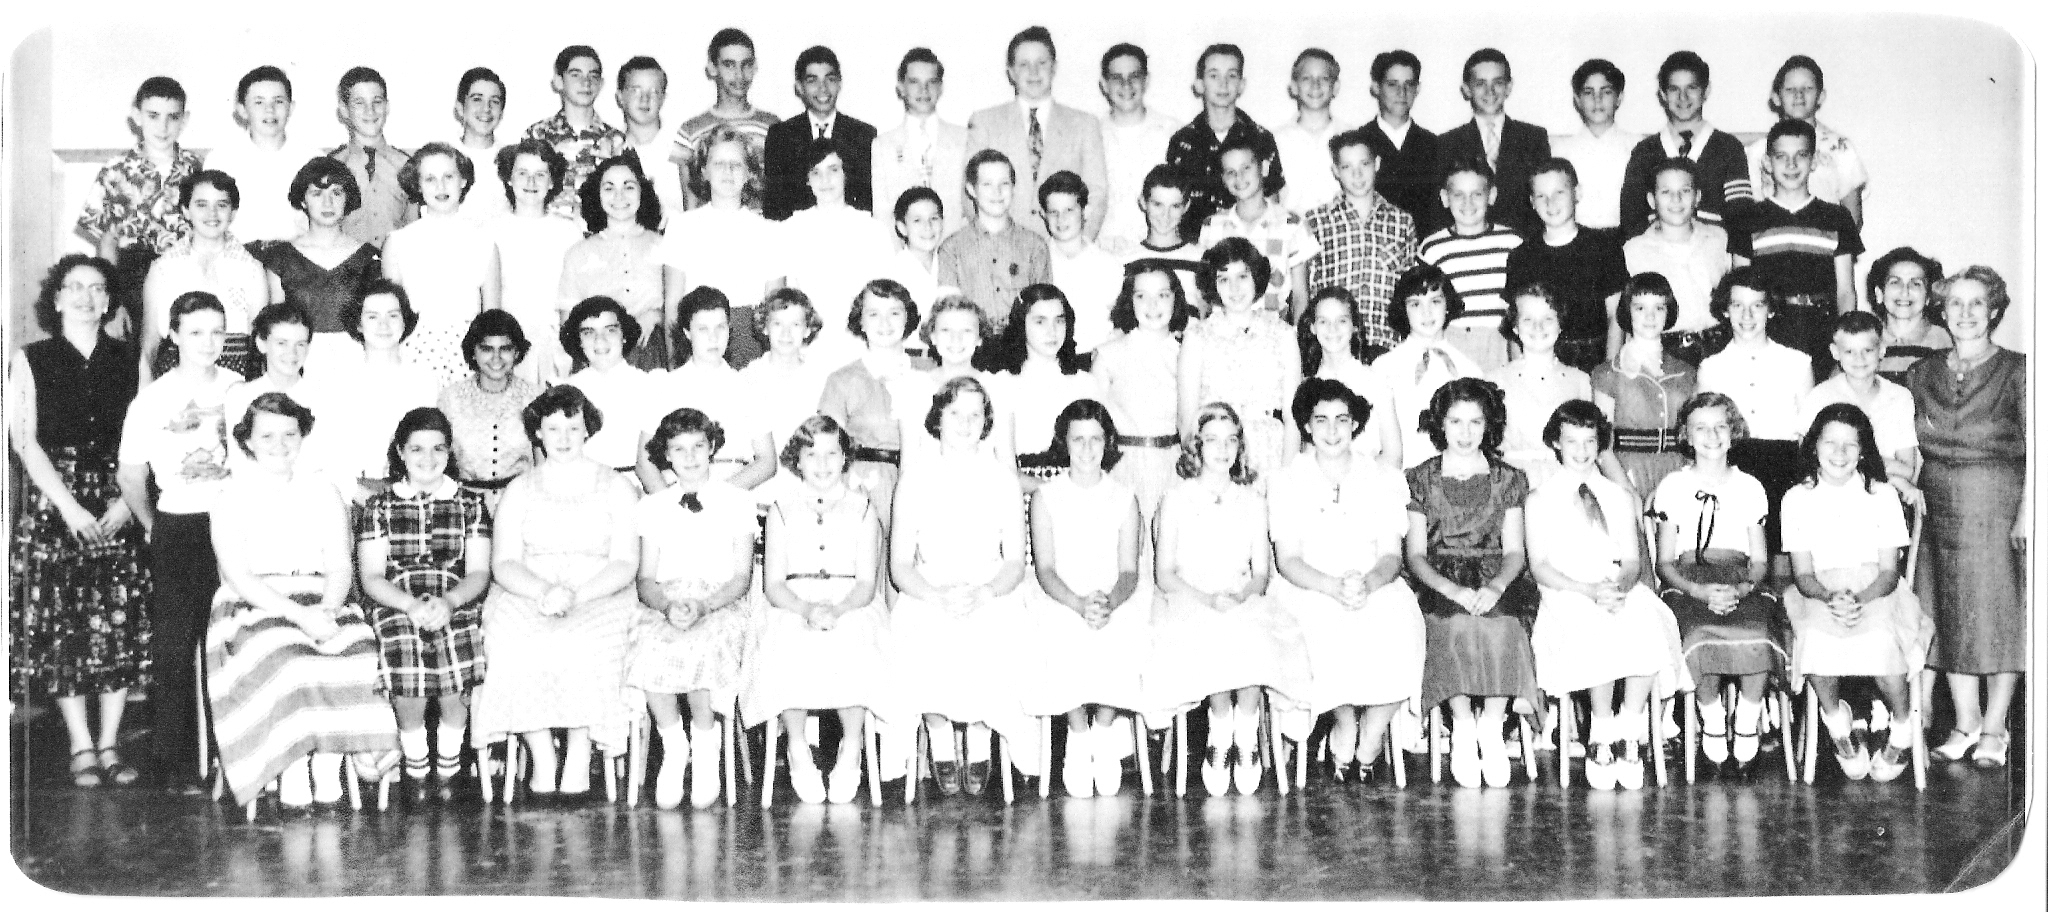 1953:  7th grade class at Annandale Elementary School